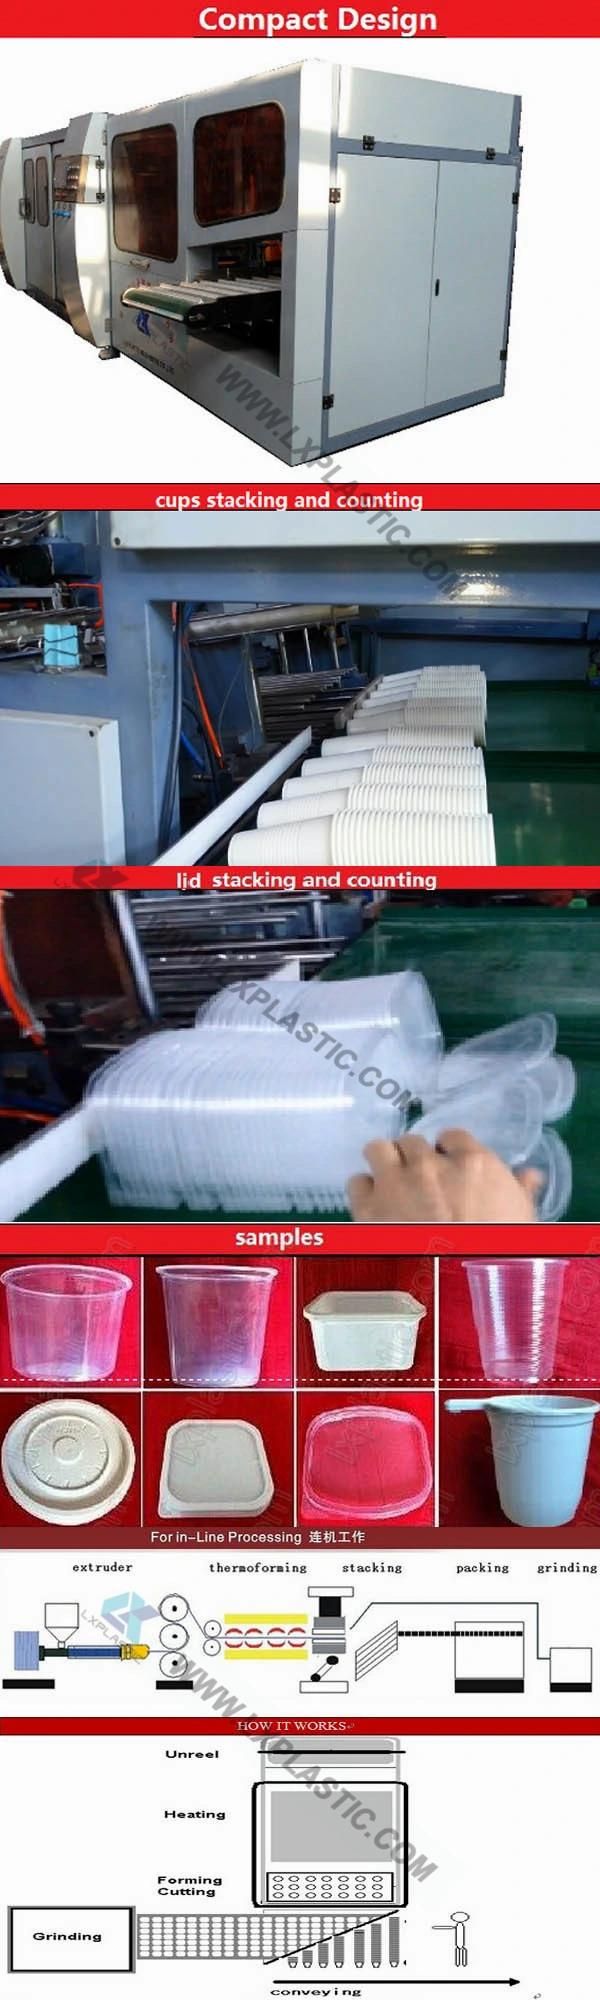 Plastic Cup Thermoforming Tooling